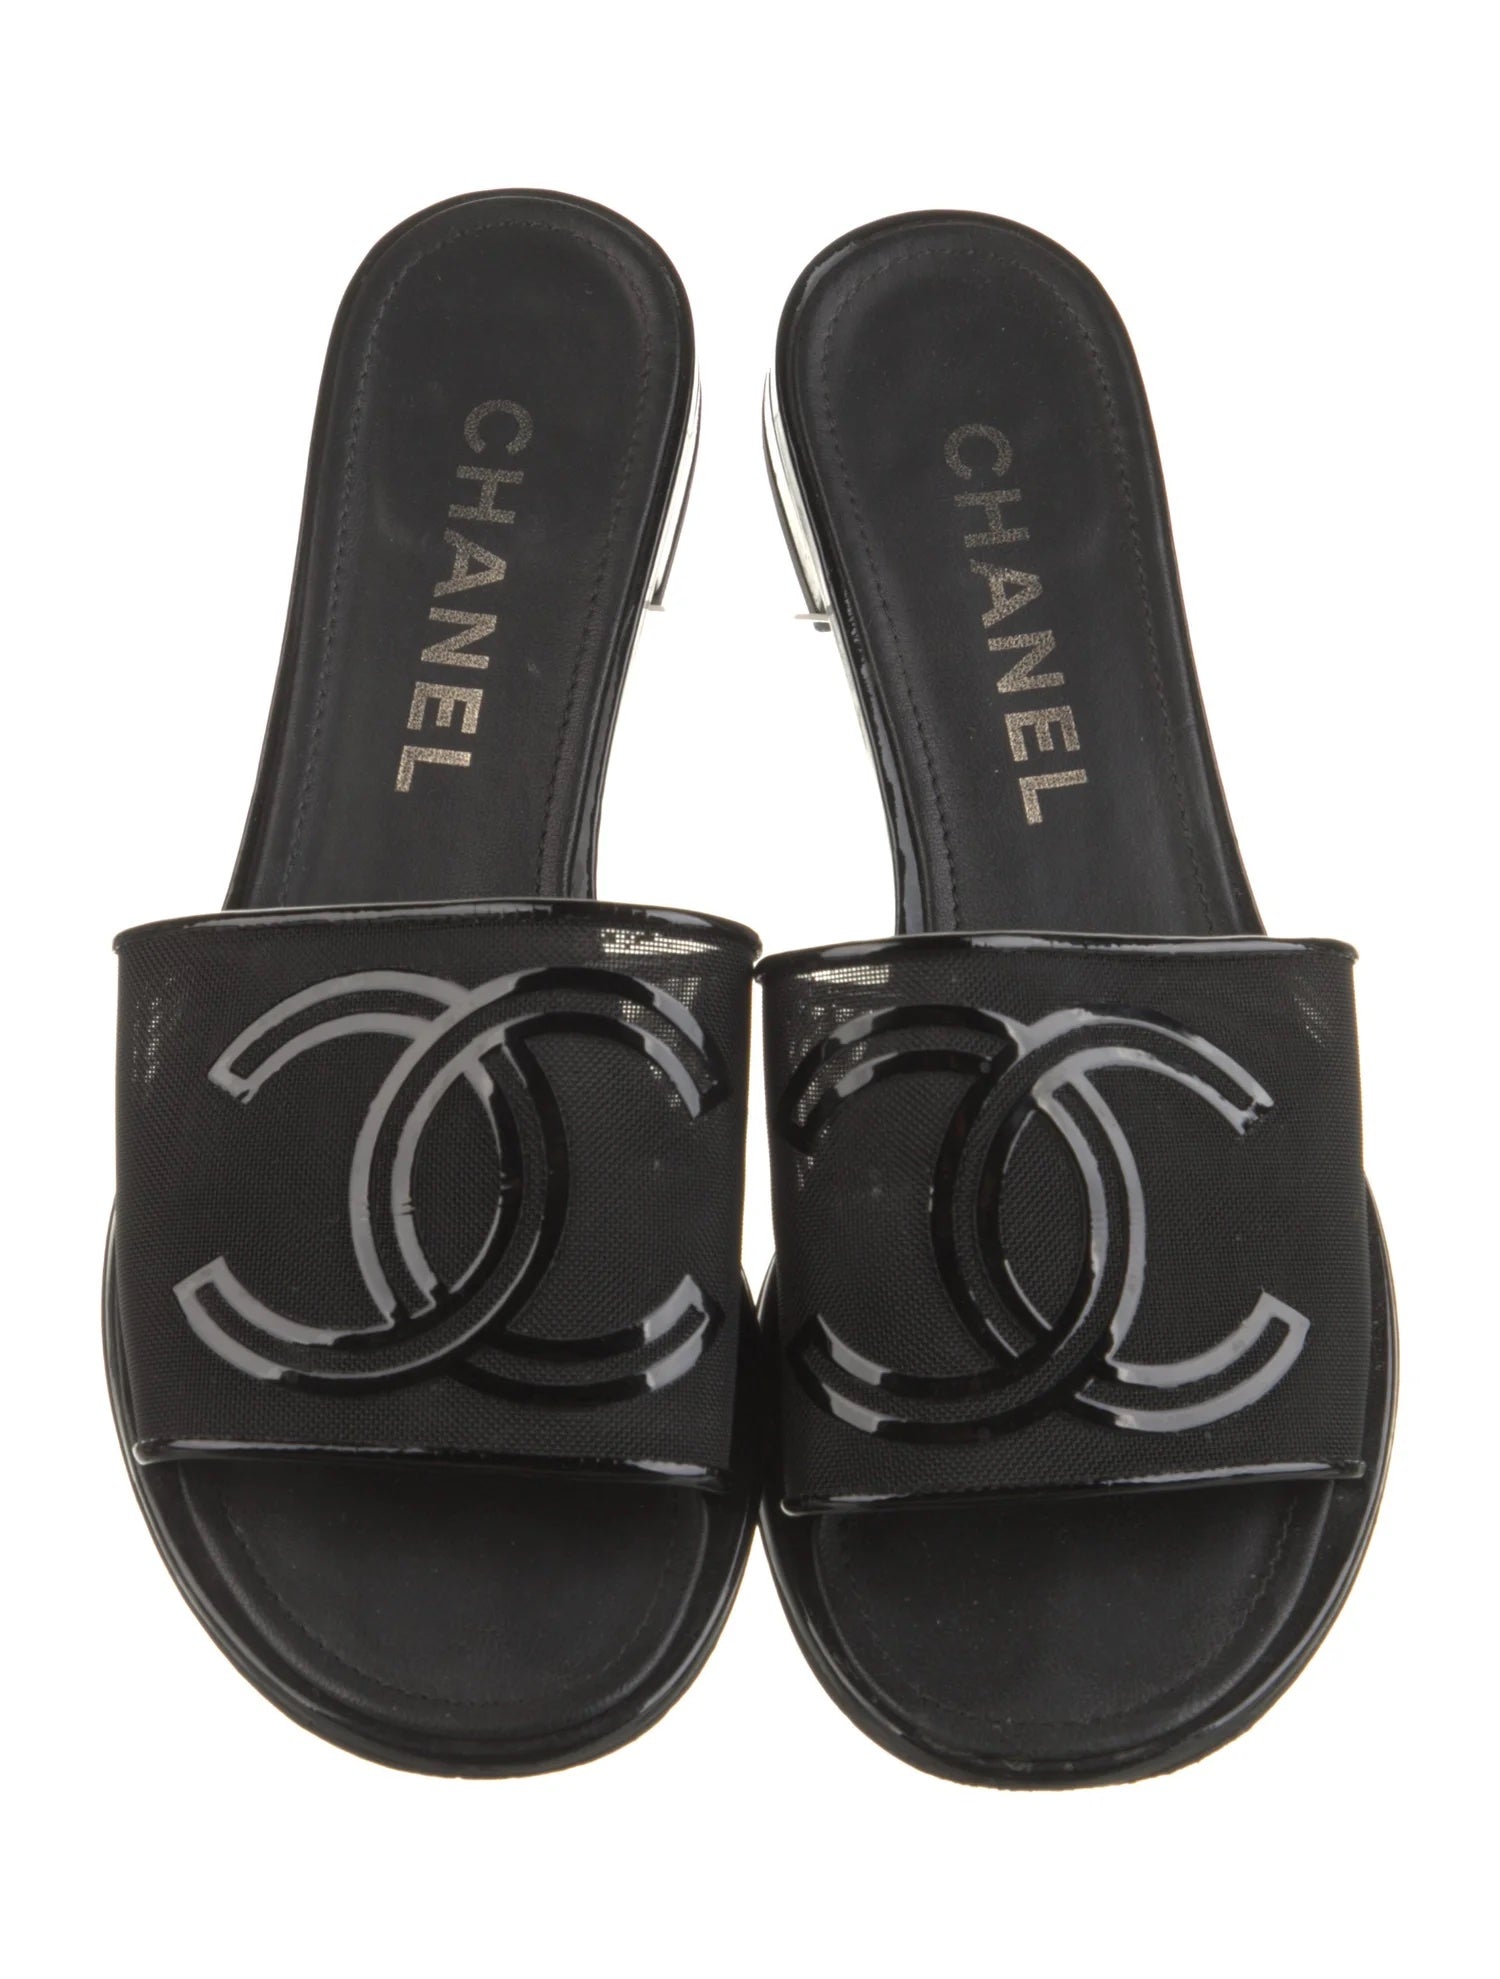 Chanel - Authenticated Sandal - Patent Leather Black Plain for Women, Very Good Condition